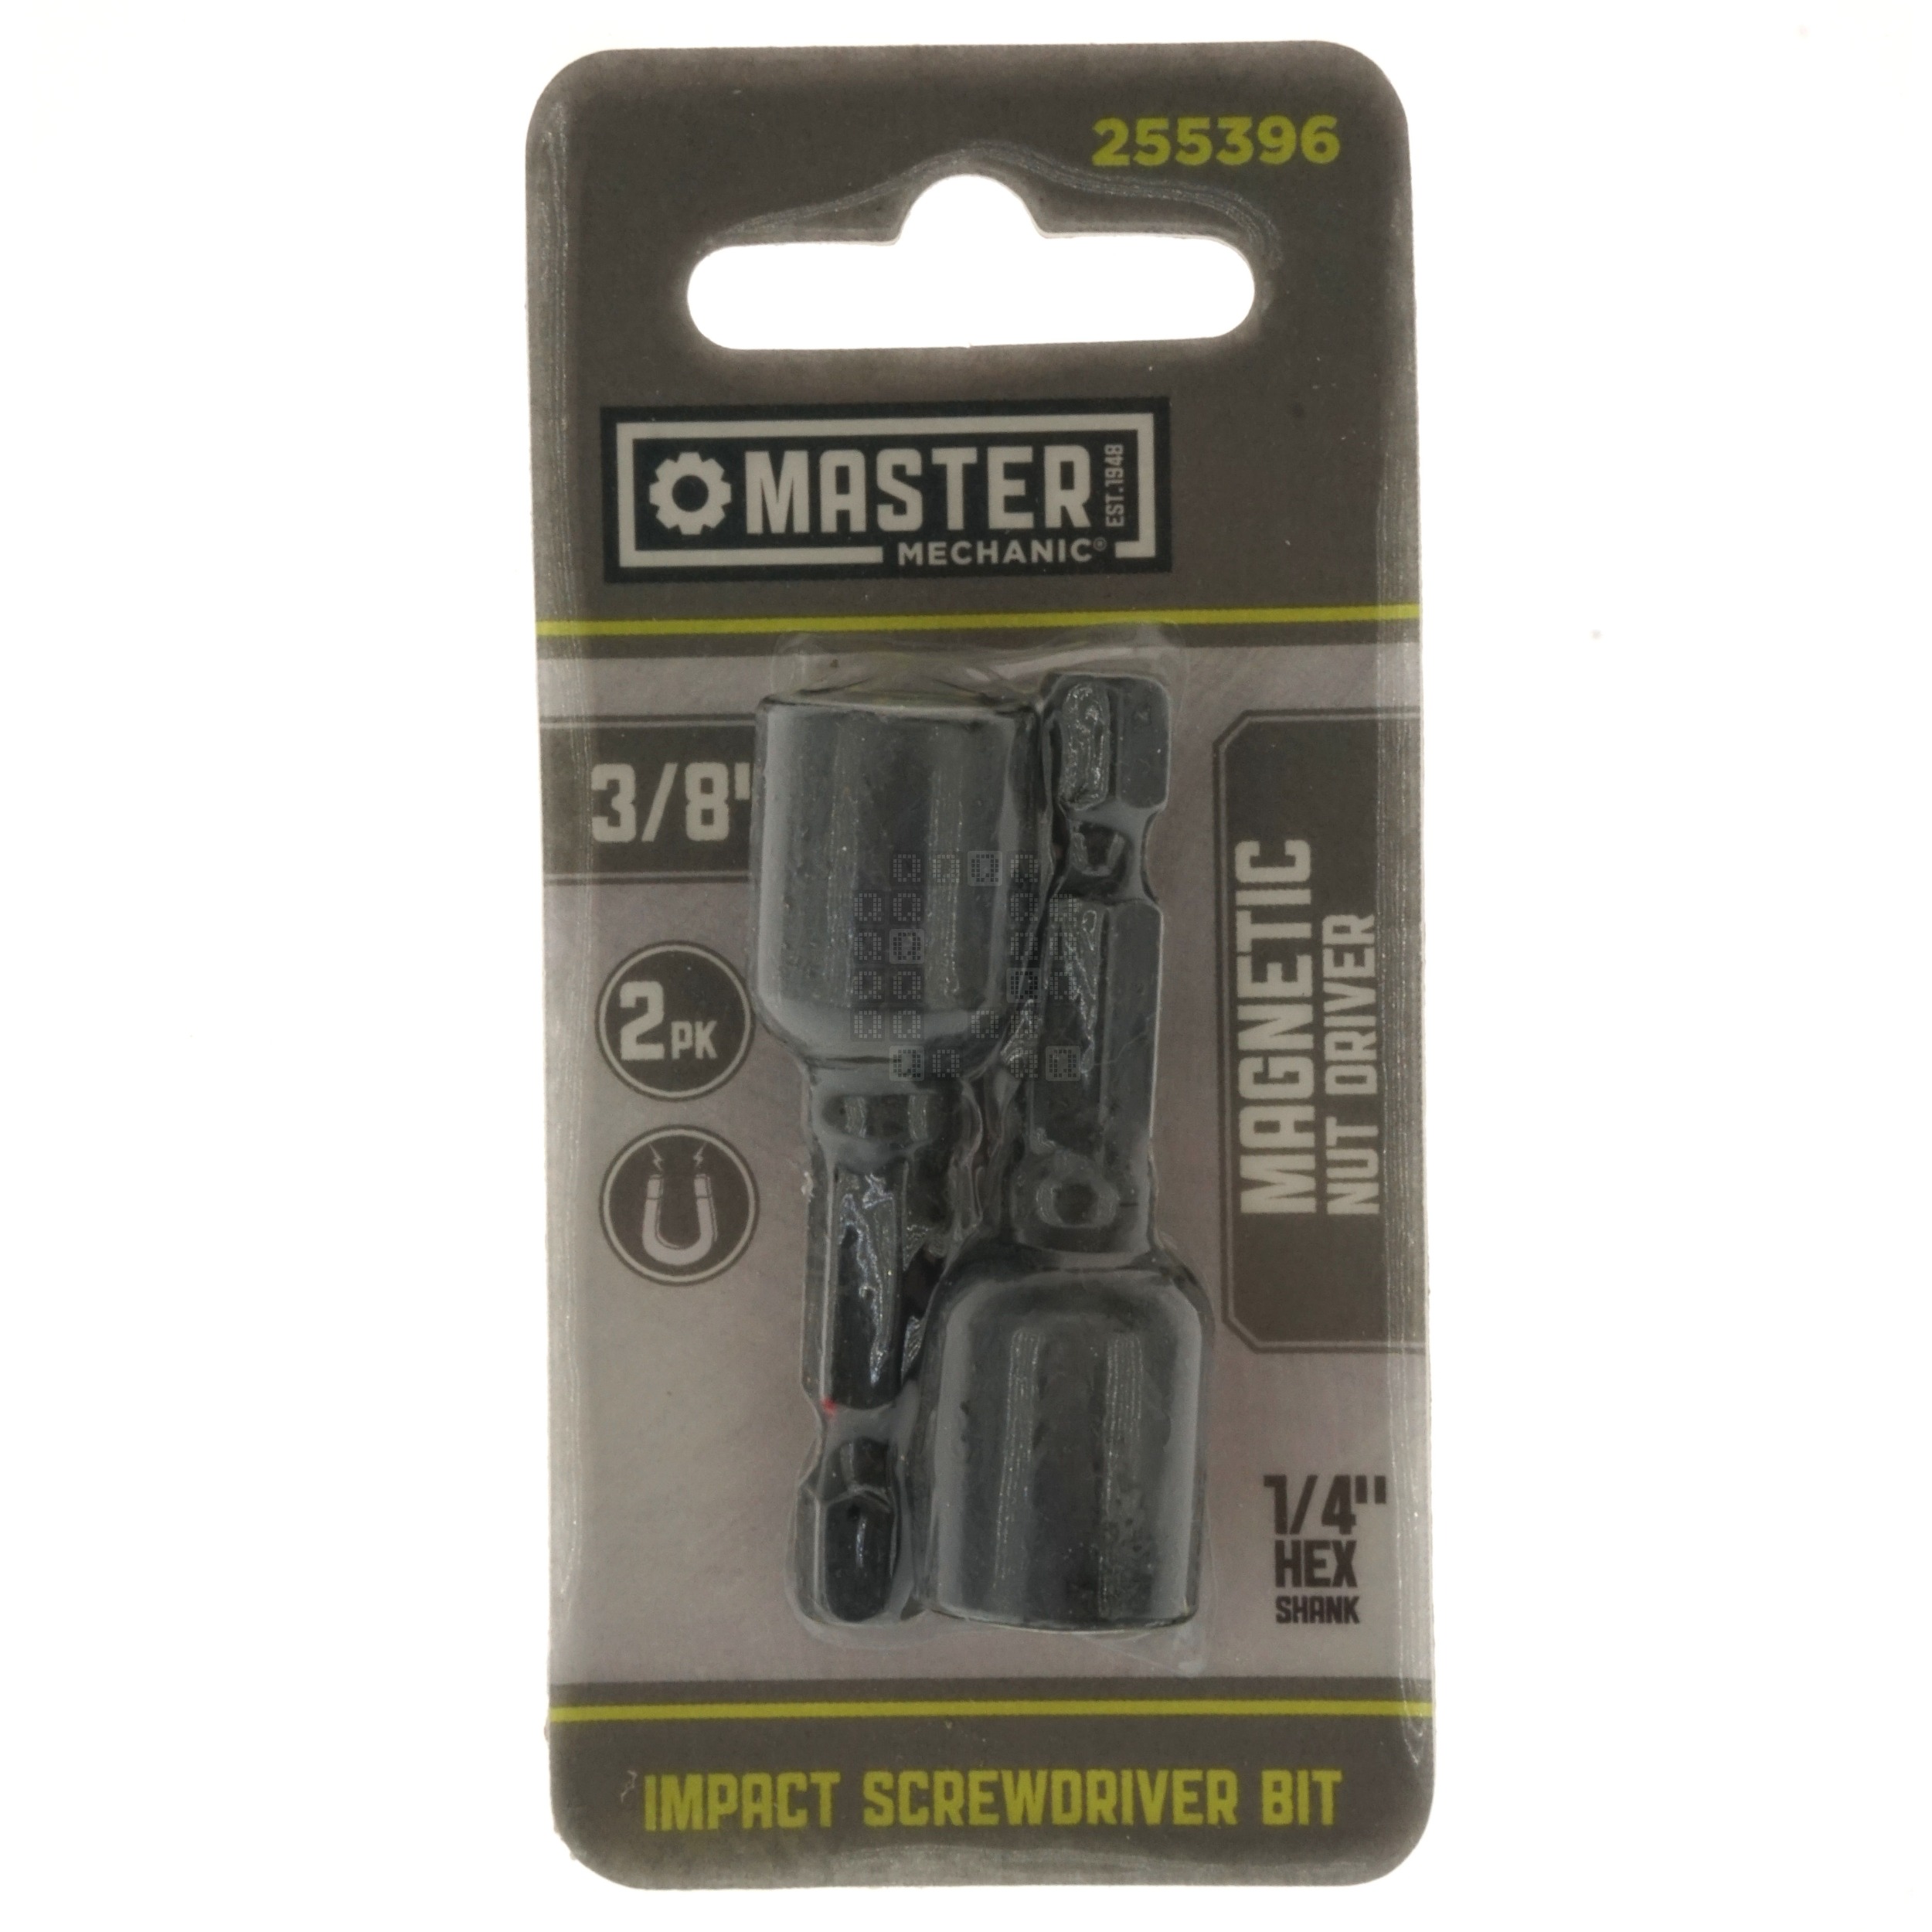 Master Mechanic 255396 3/8" Magnetic Hex Nut Driver, 1/4" Hex Shank, 2-Pack